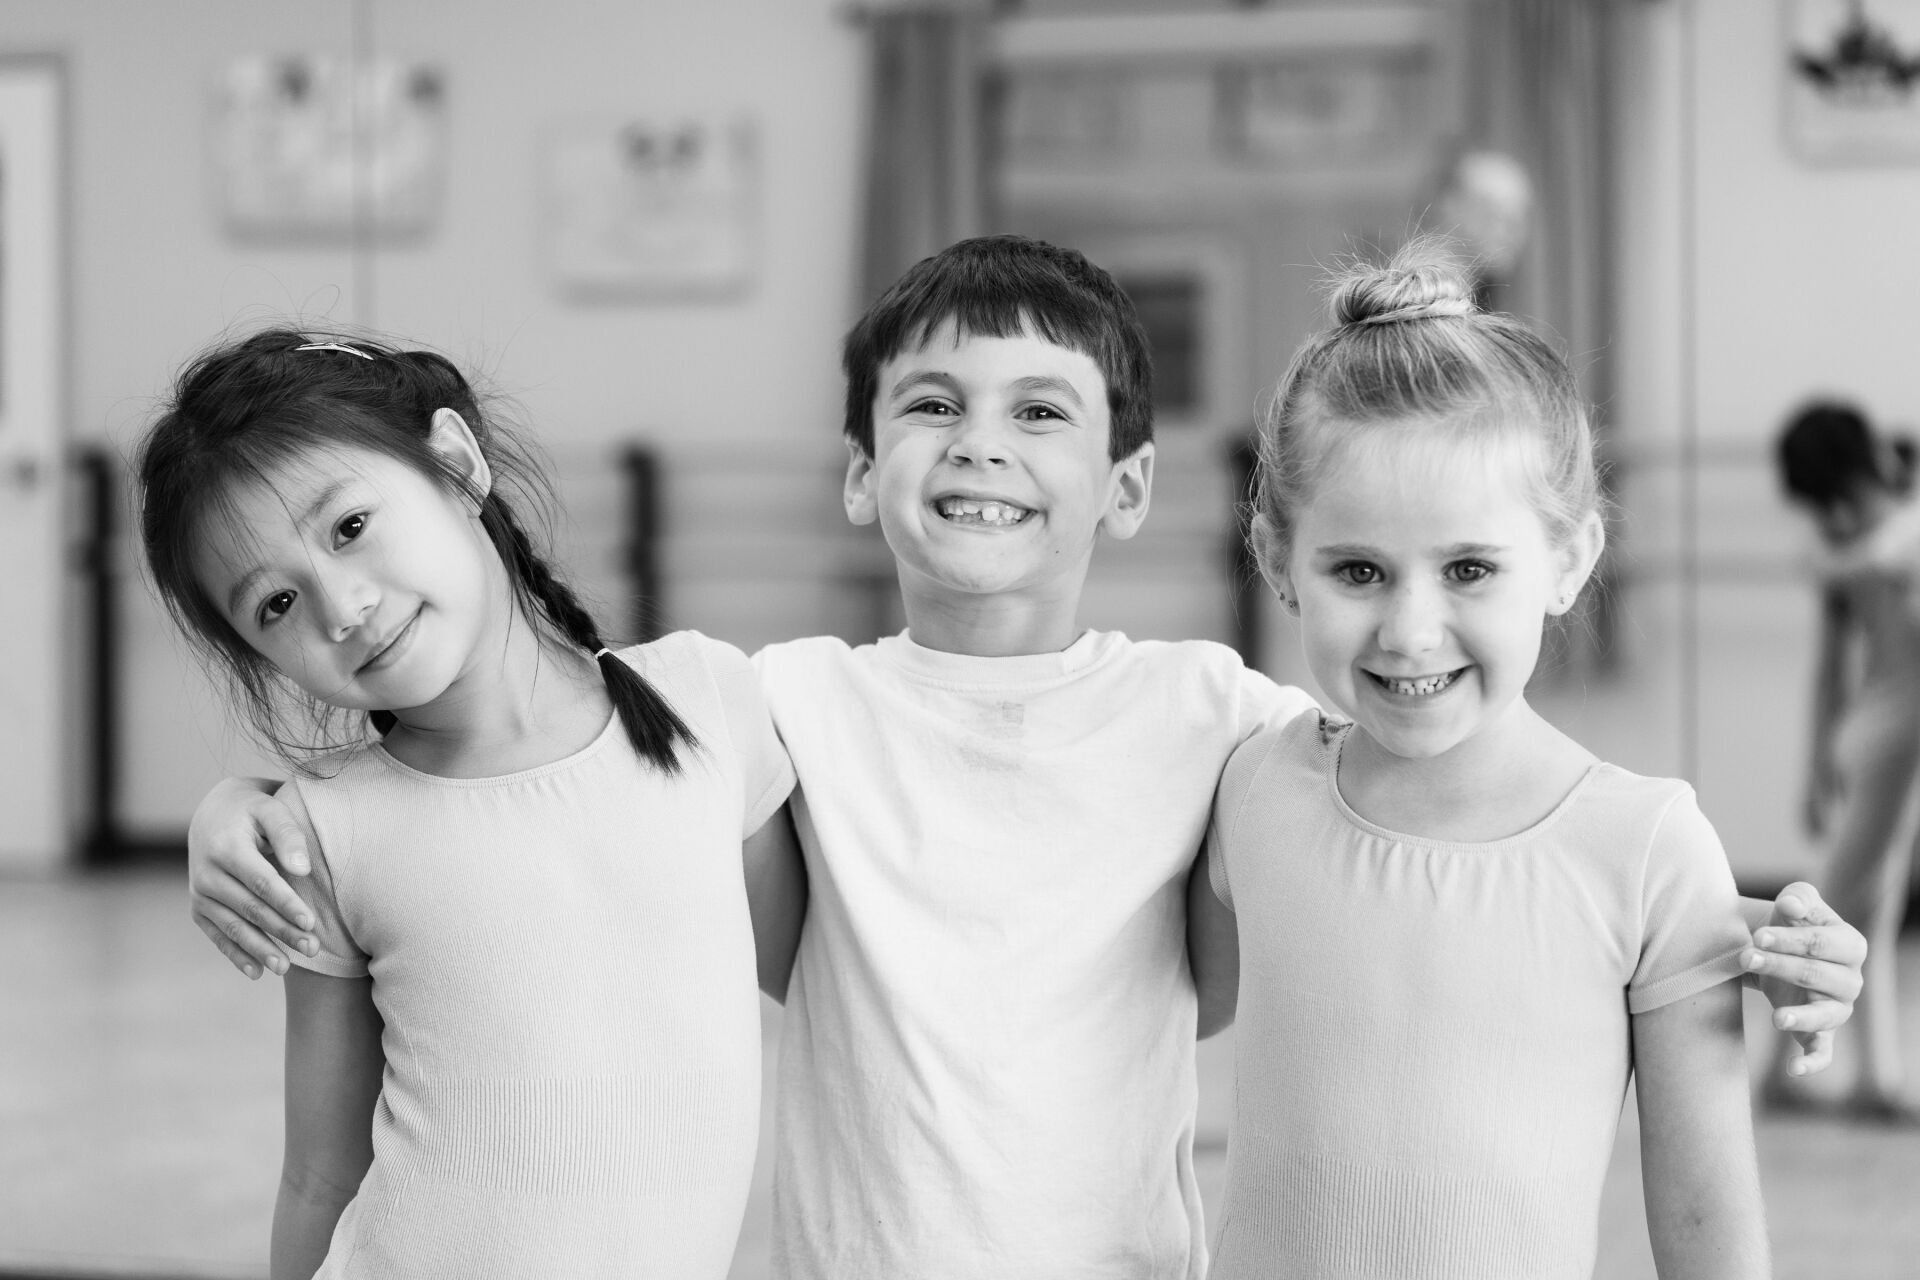 Leroux Students - Dance Classes in Limerick, PA